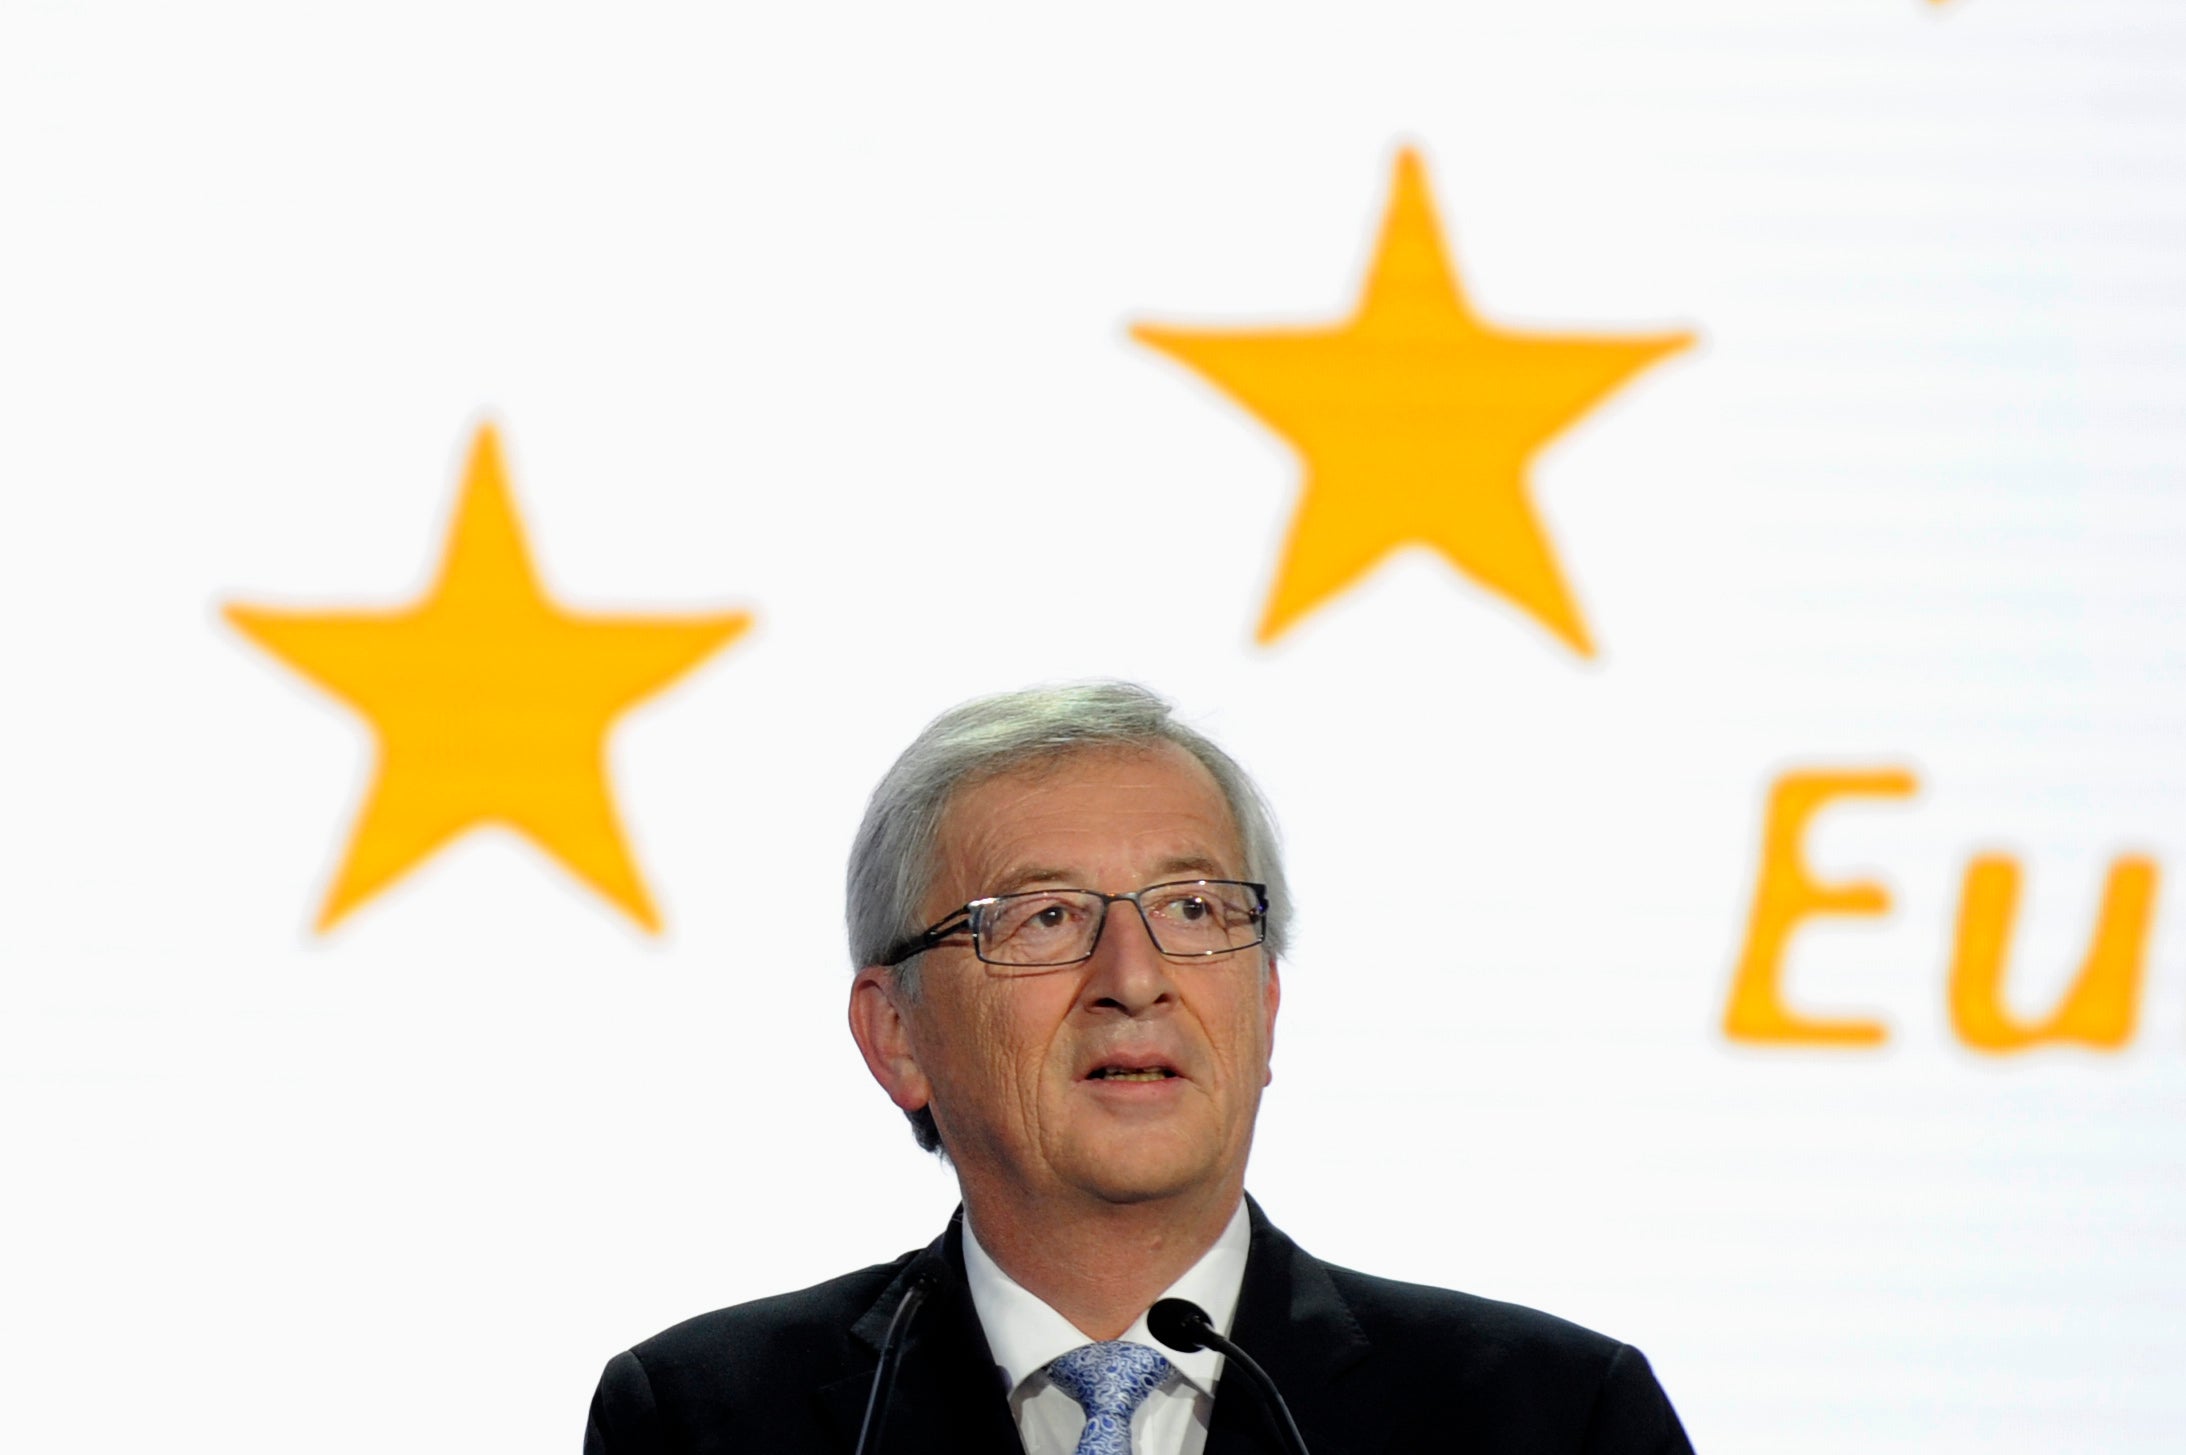 Jean-Claude Juncker's management style has been brought into question